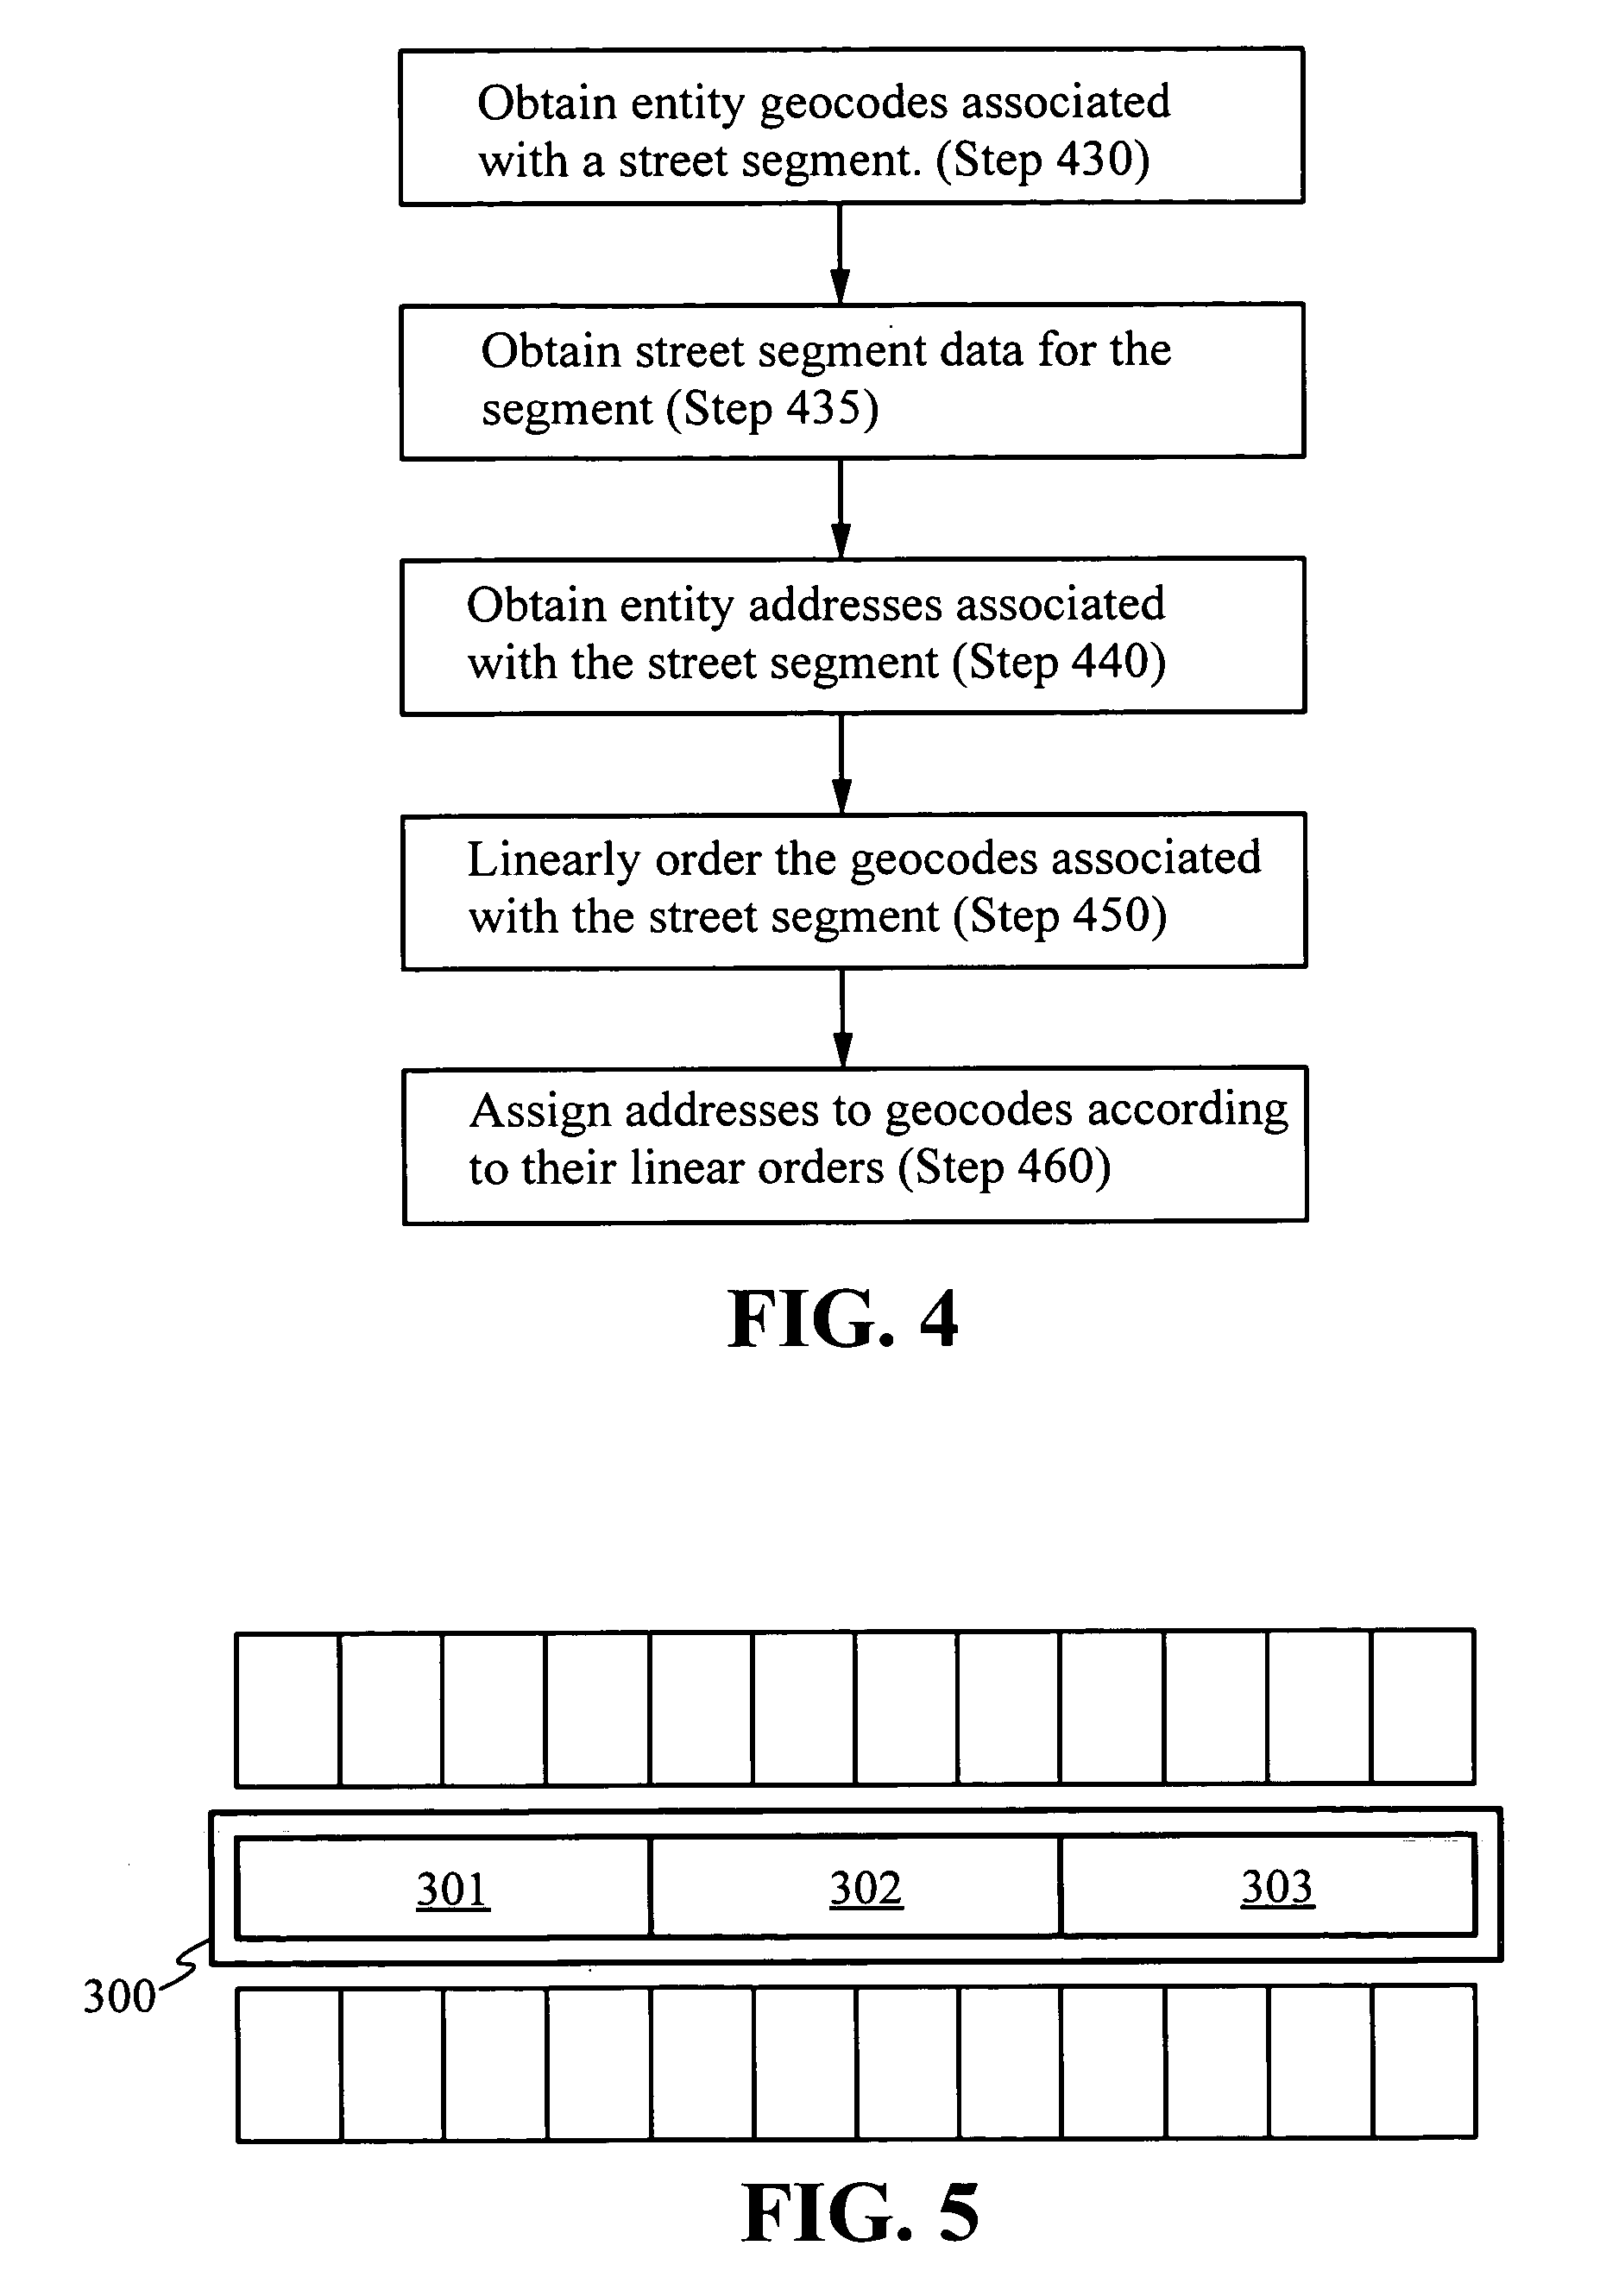 Methods for assigning geocodes to street addressable entities